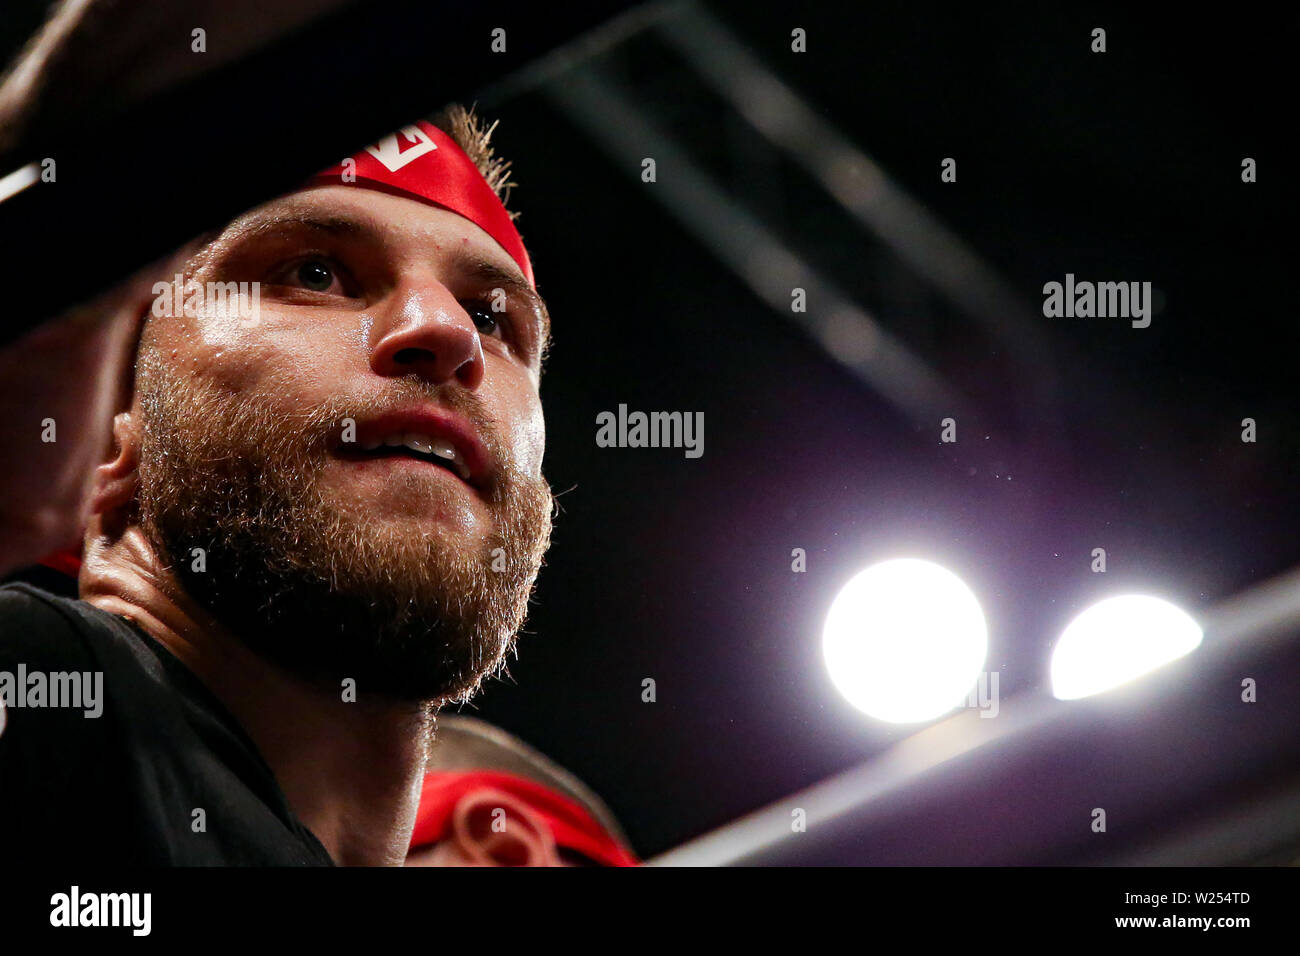 Tommy Frank enters the ring before his fight with John Chuwa during the Dennis Hobson Promotions boxing event at Ponds Forge, Sheffield. Picture date: Stock Photo